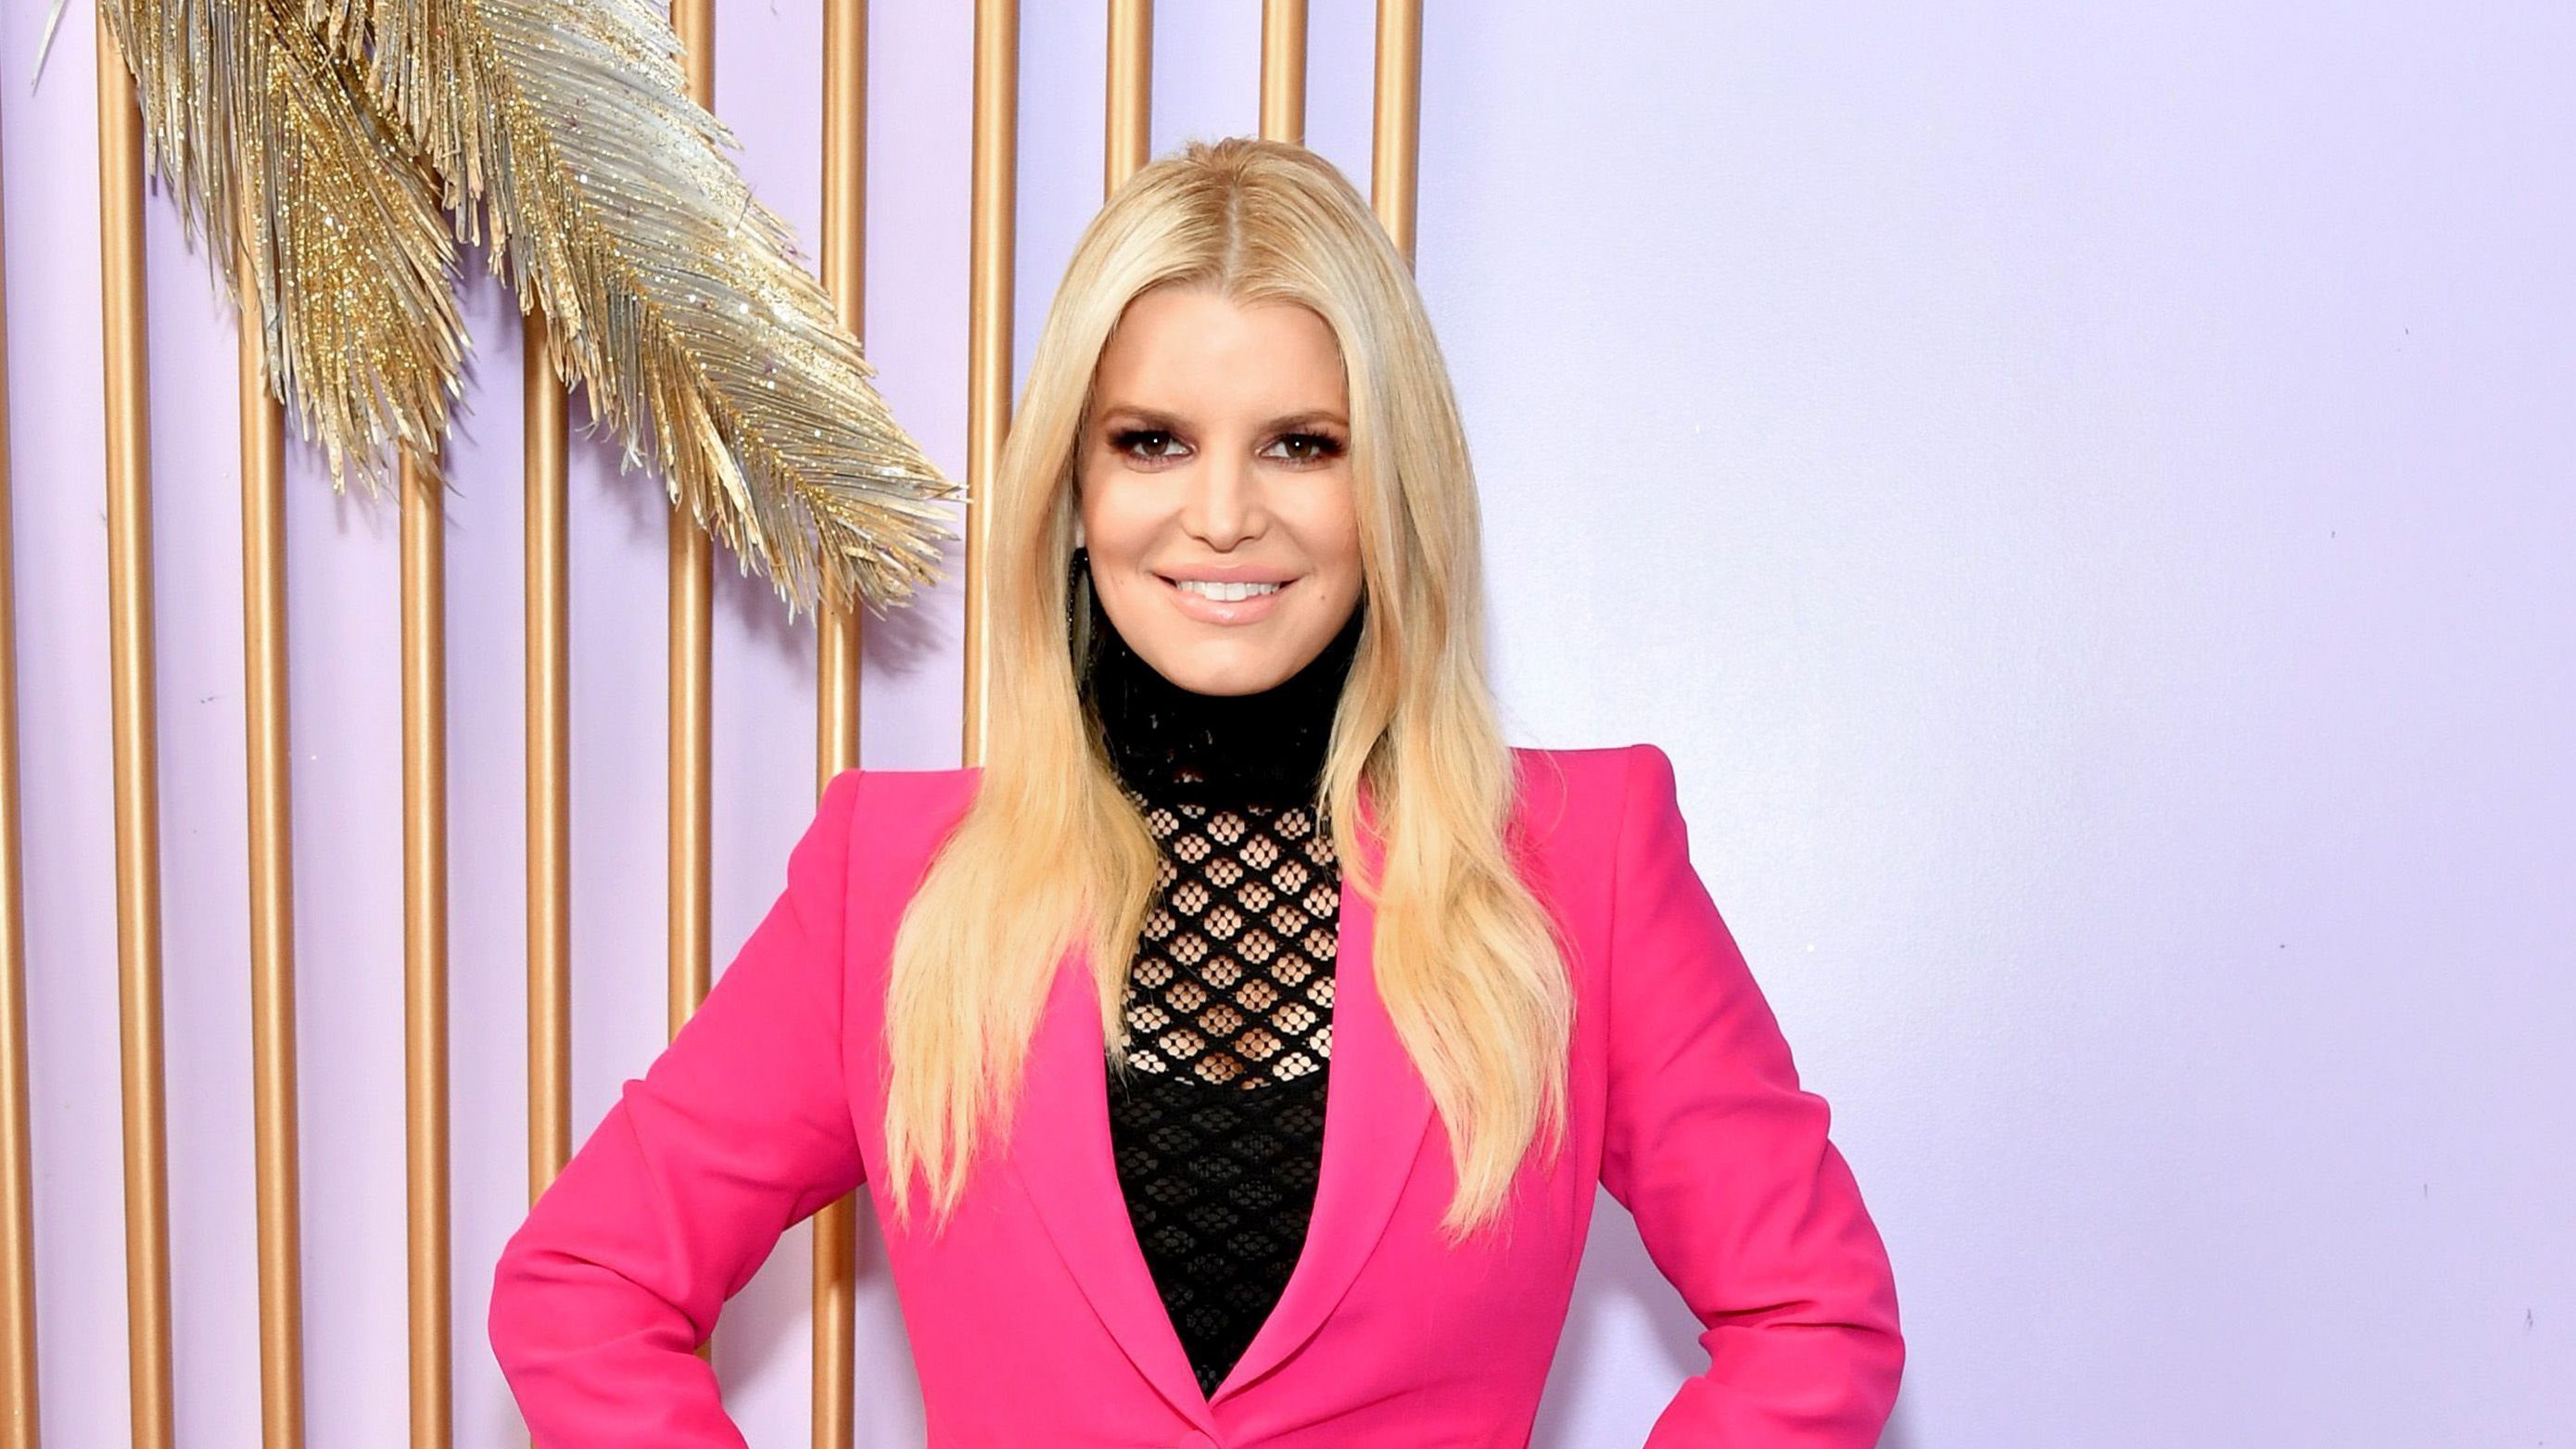 Jessica Simpson shares glowing makeup-free morning selfie